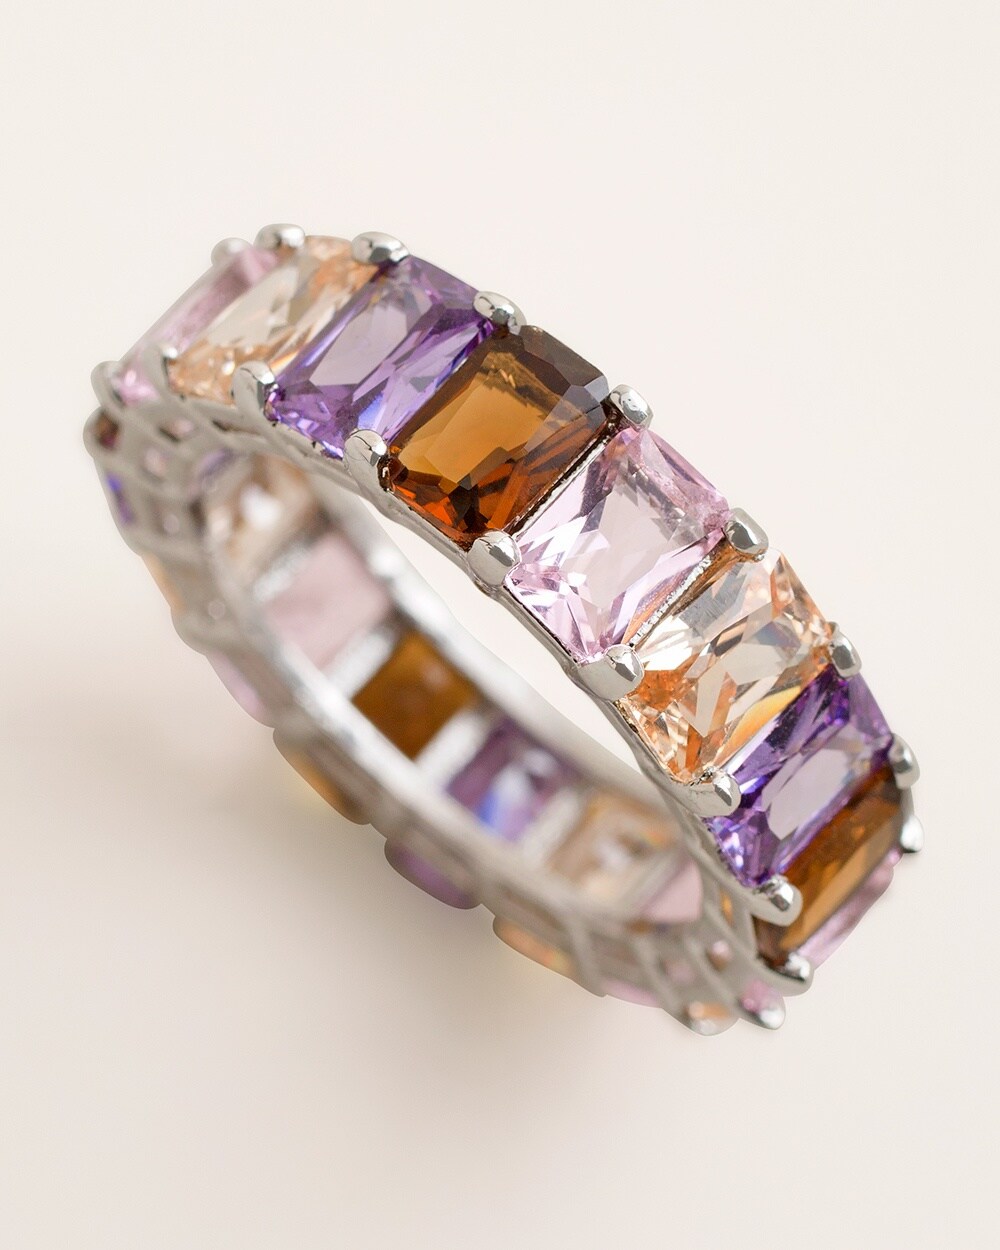 Multi-Colored Warm-Toned Baguette Ring